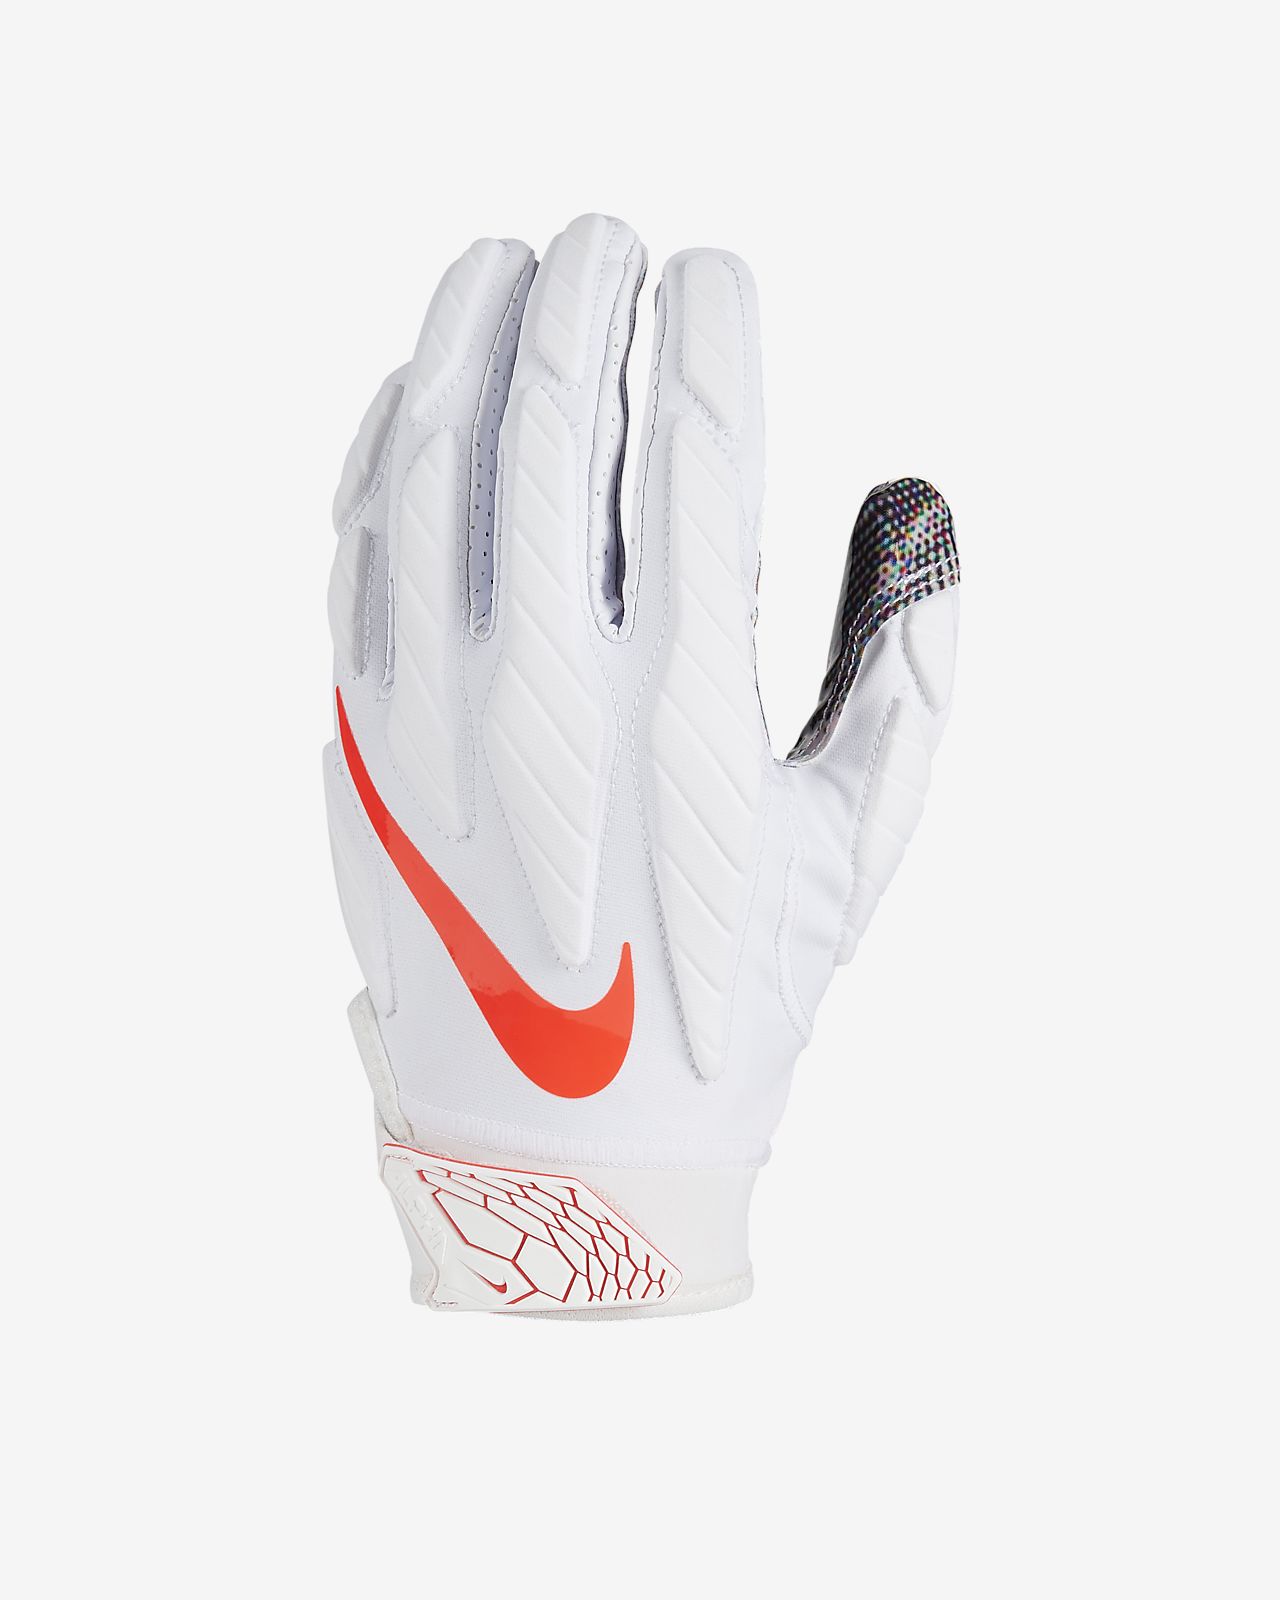 Nike Football Gloves Sizing Chart - Images Gloves and Descriptions ...